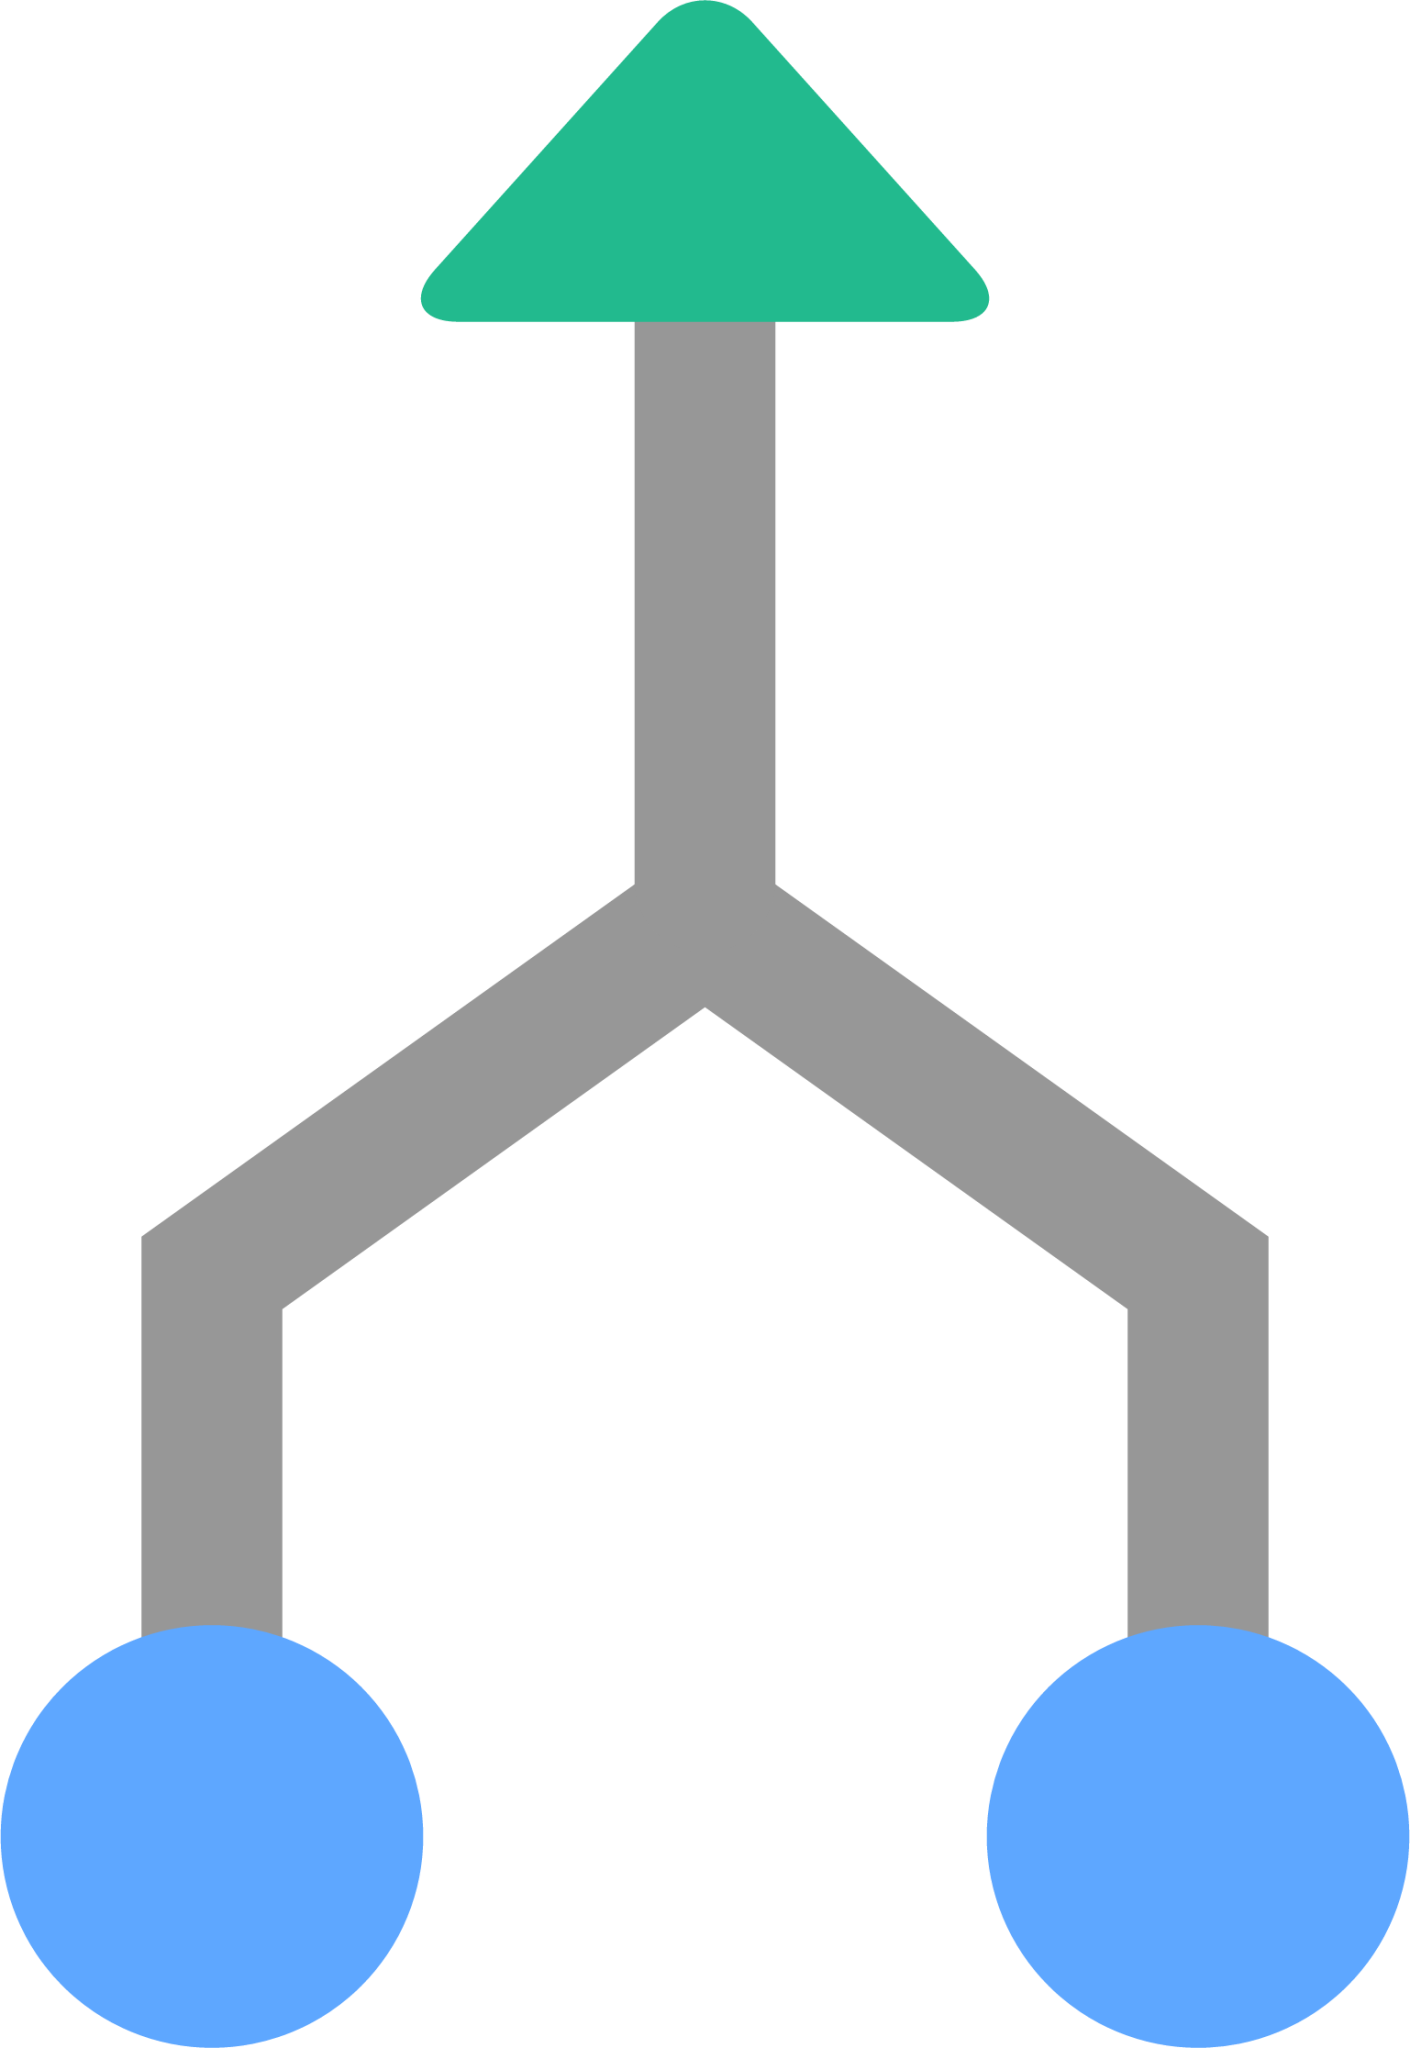 connections icon